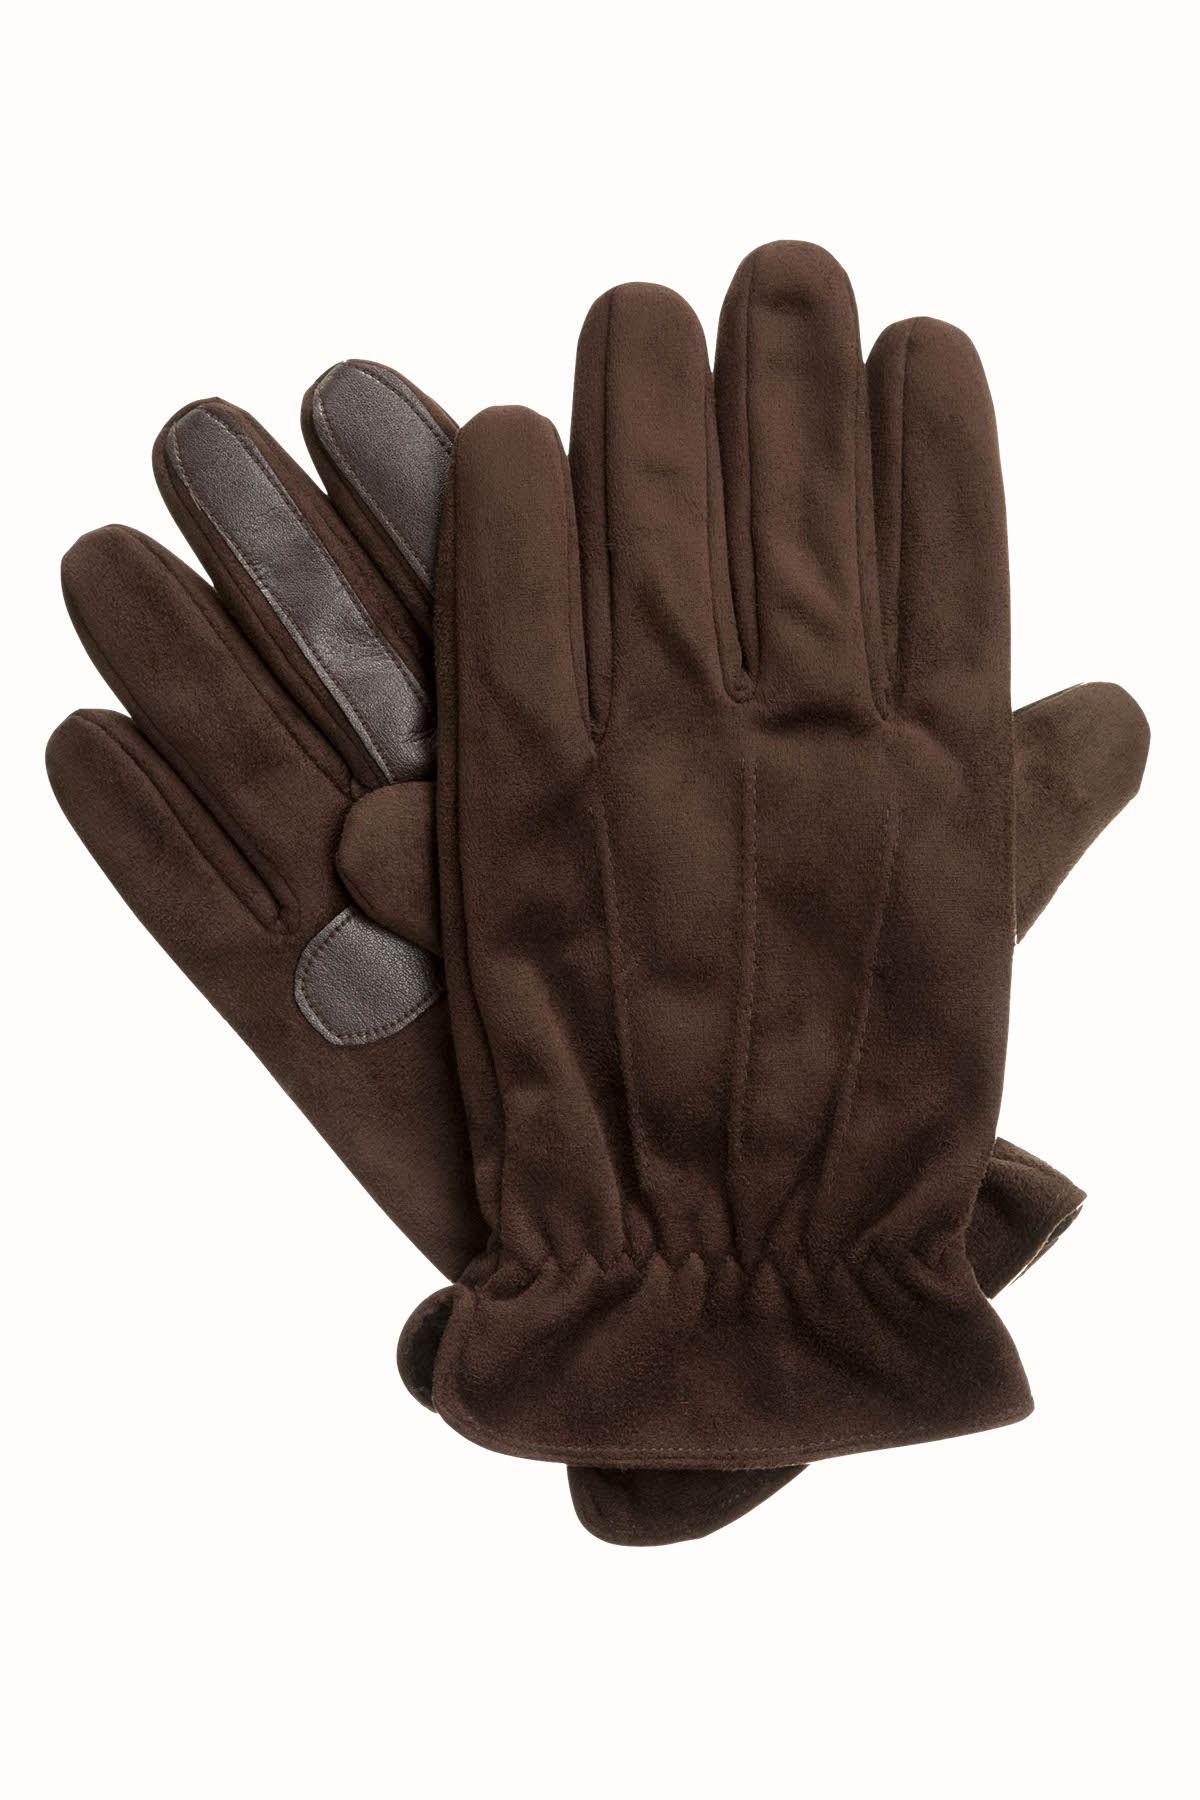 Isotoner Signature Brown Ultraplush SmarTouch Brushed Microfiber Gloves - XLarge